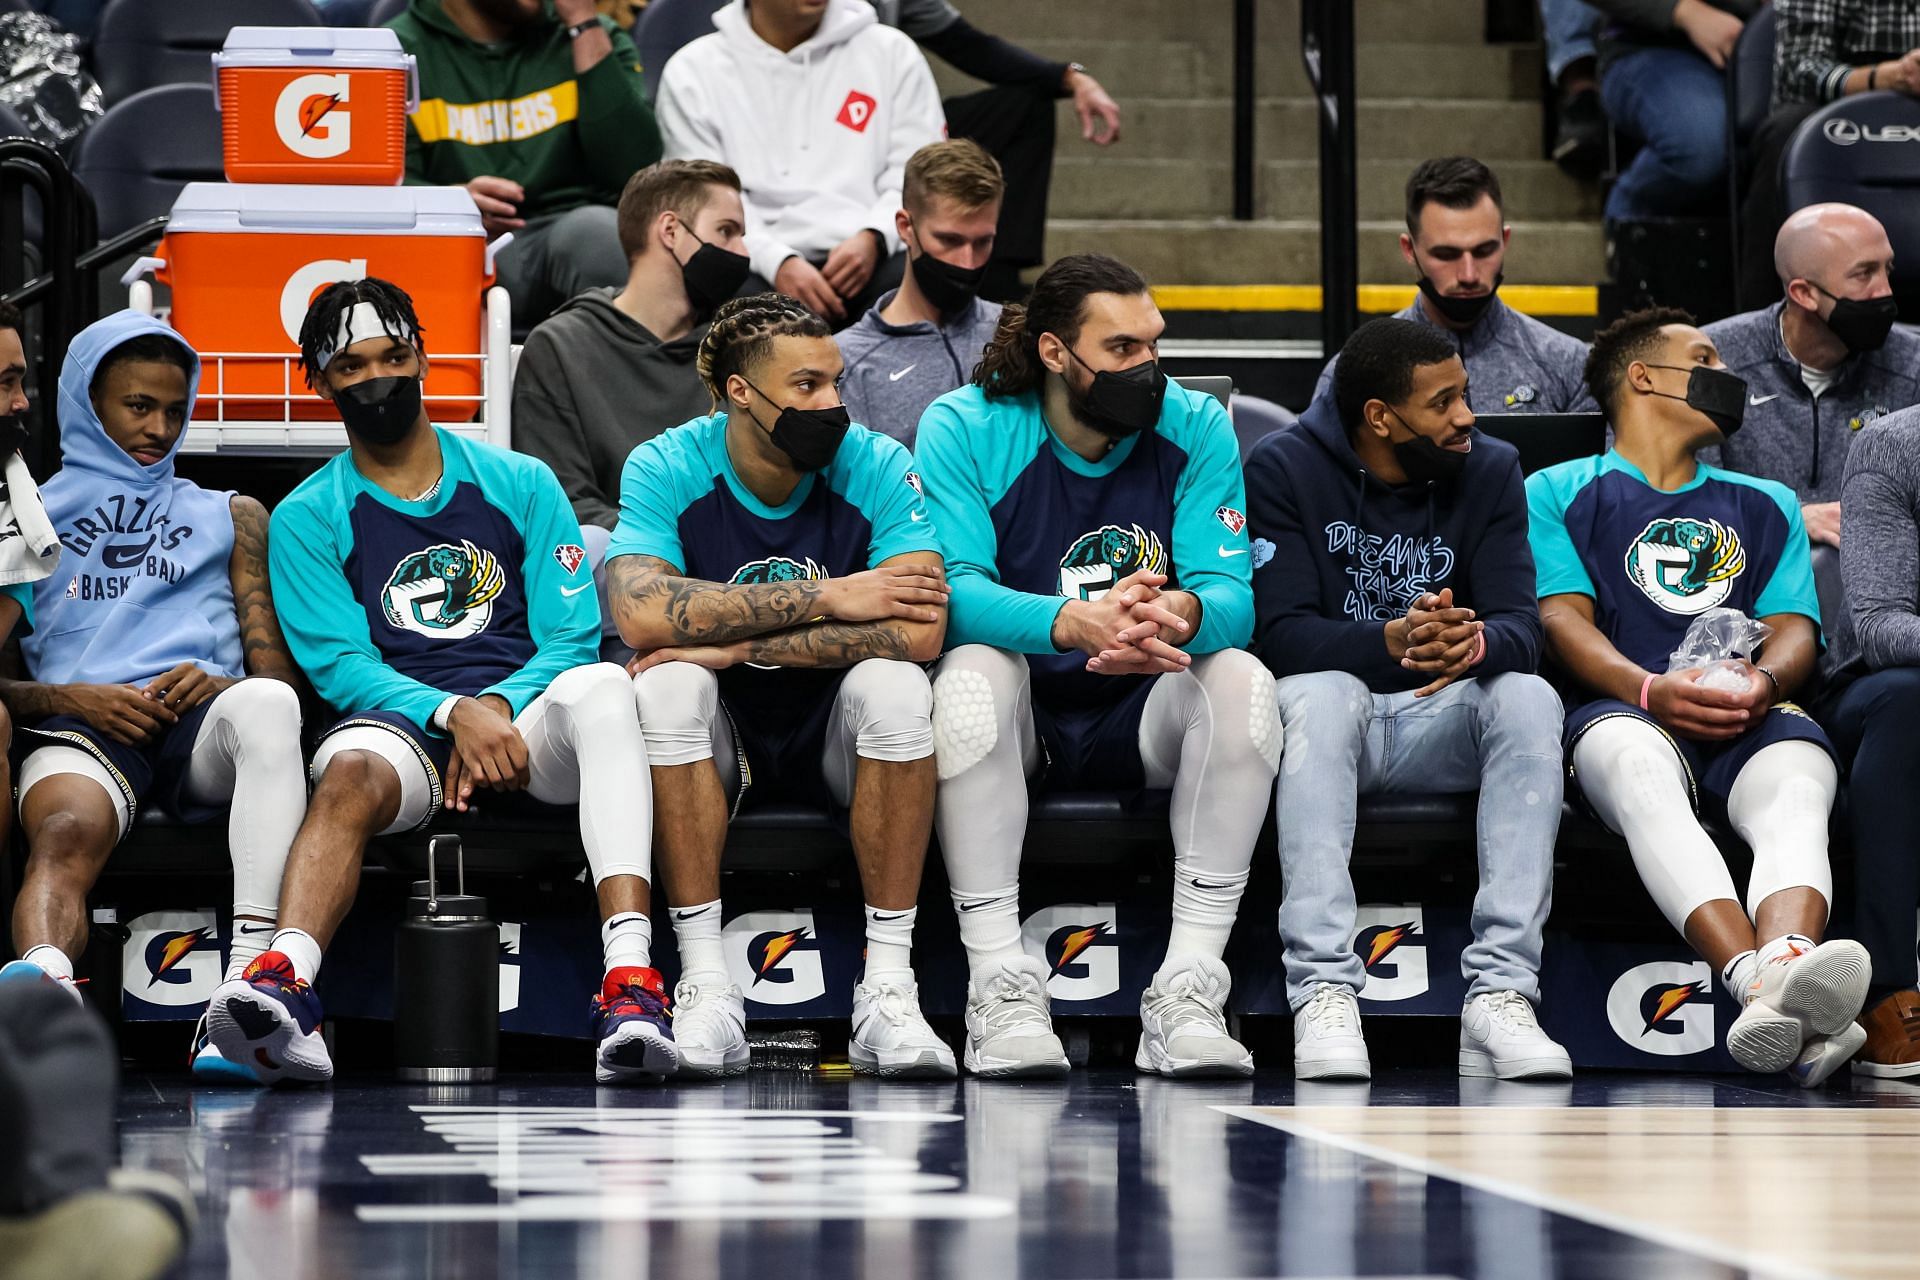 Memphis Grizzlies players on the bench against the Minnesota Timberwolves